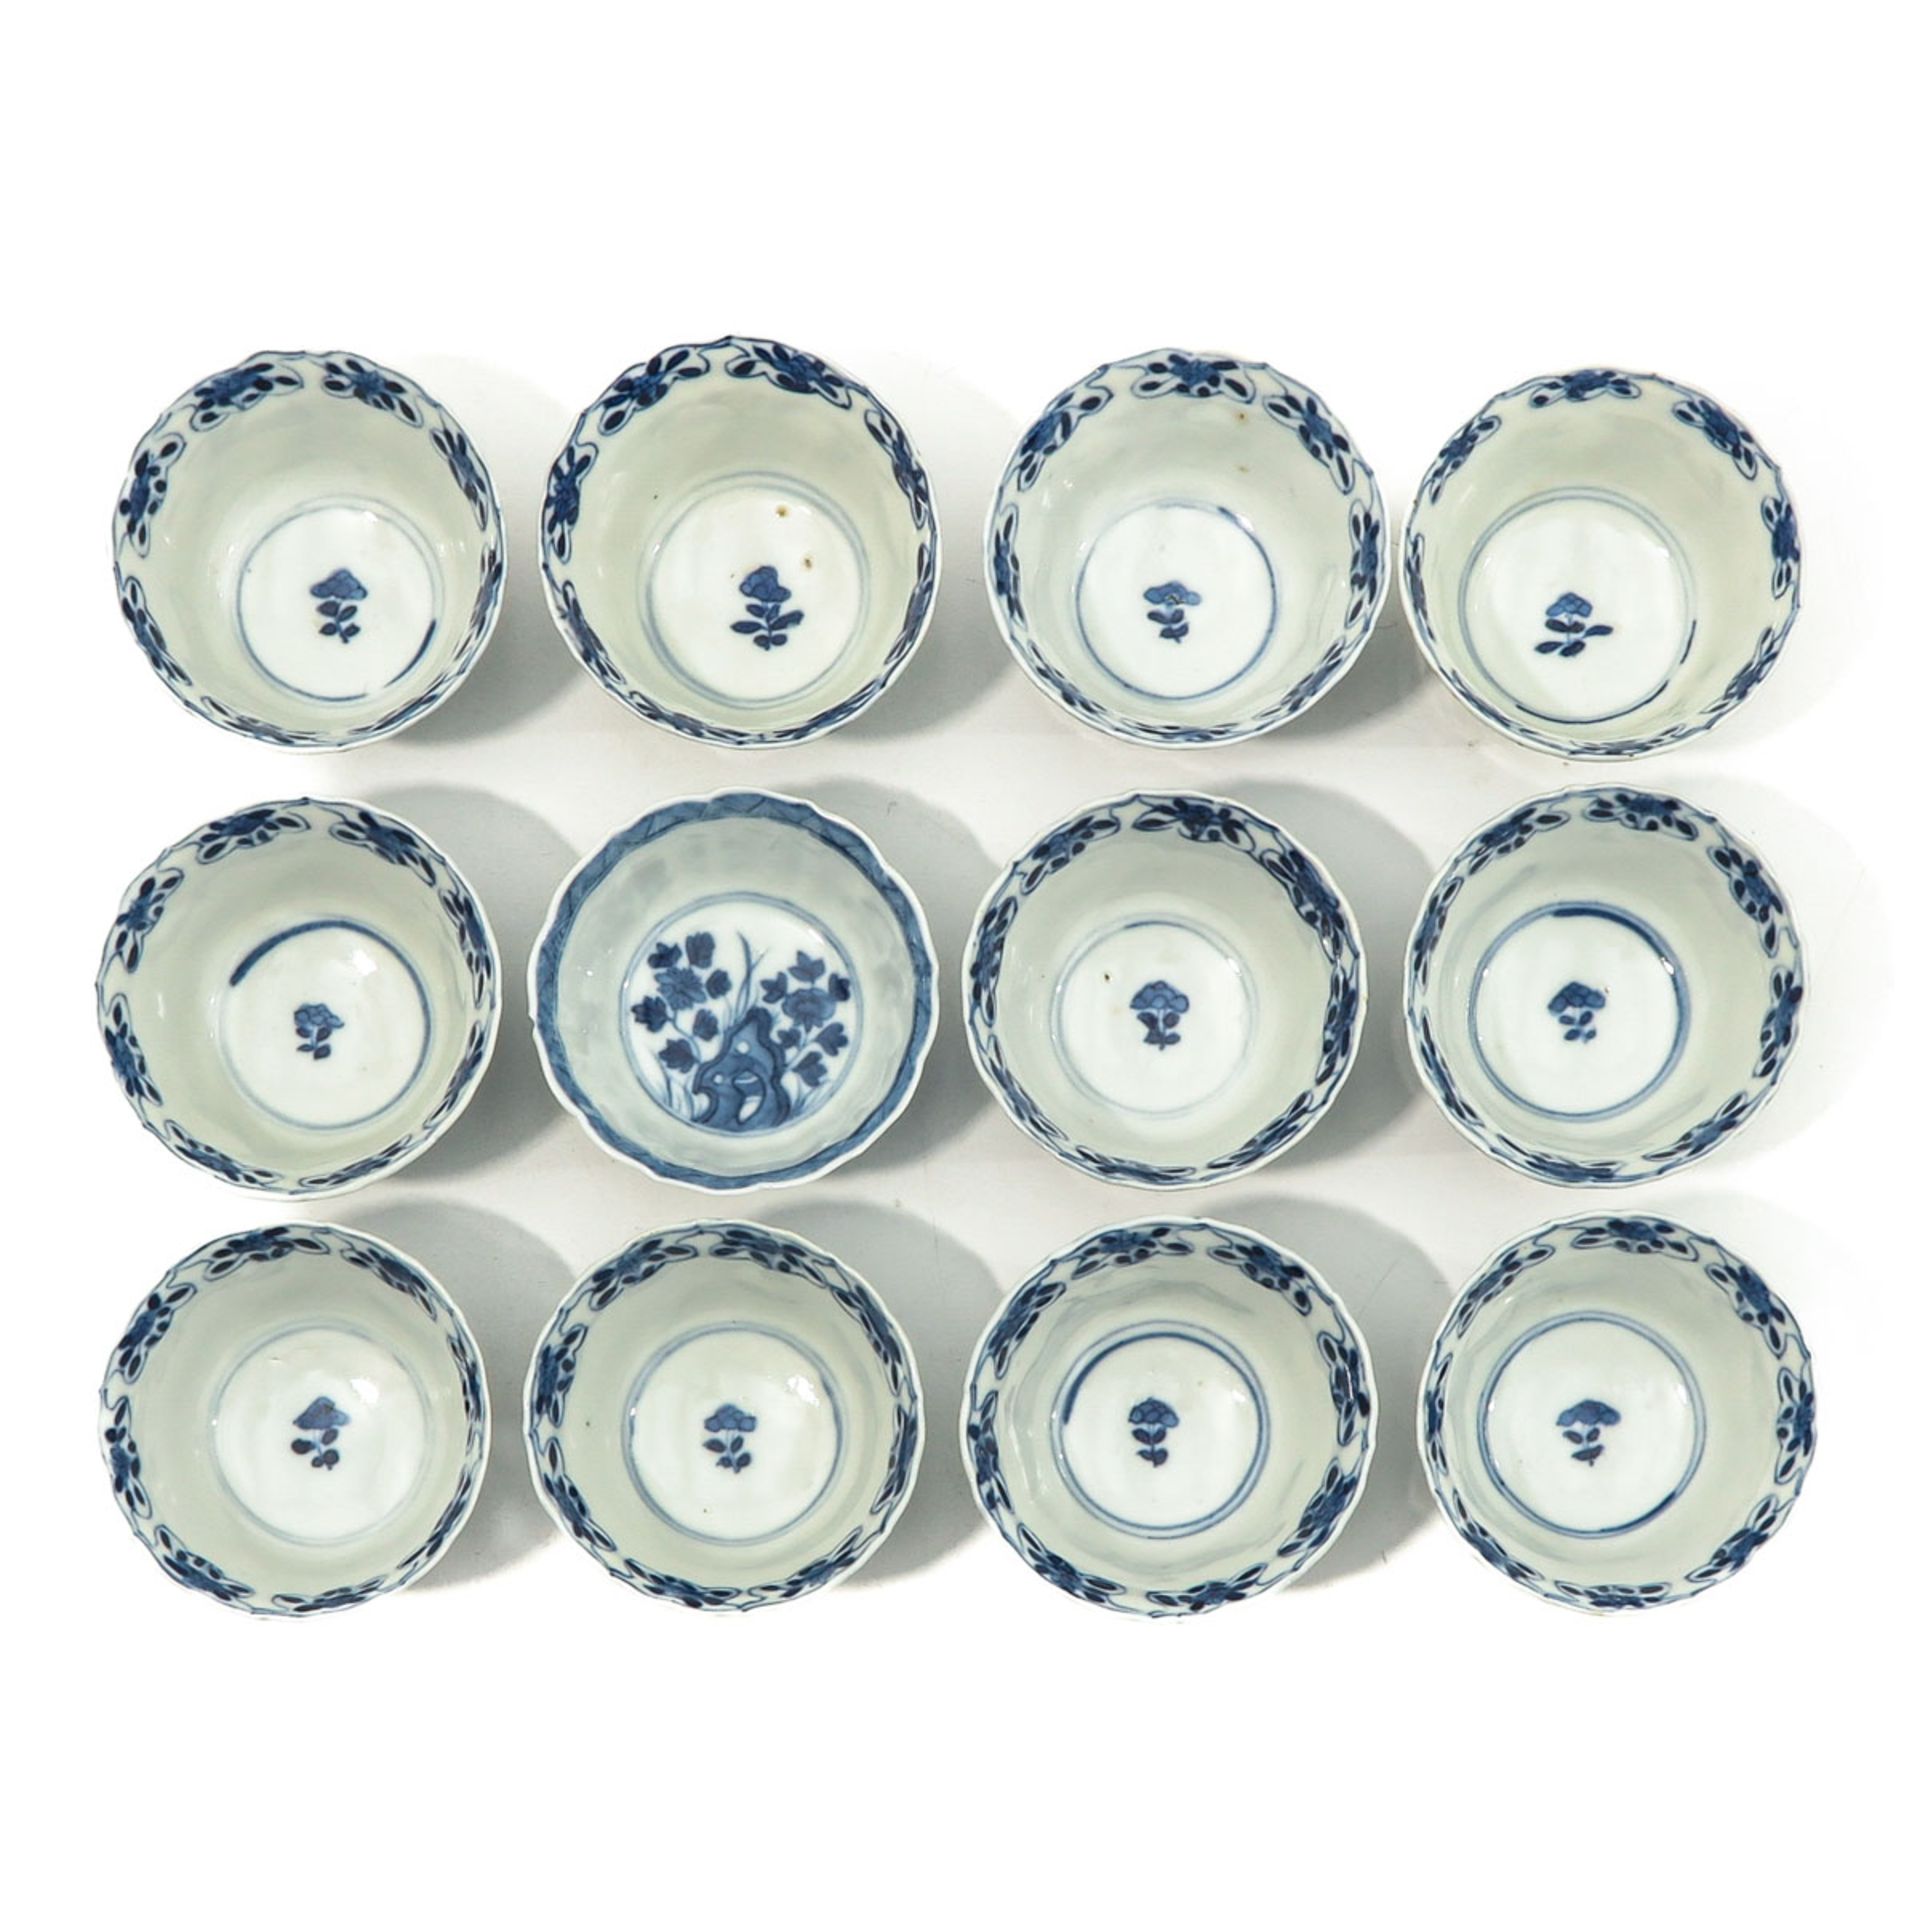 A Series of 12 Cups and Saucers - Bild 5 aus 10